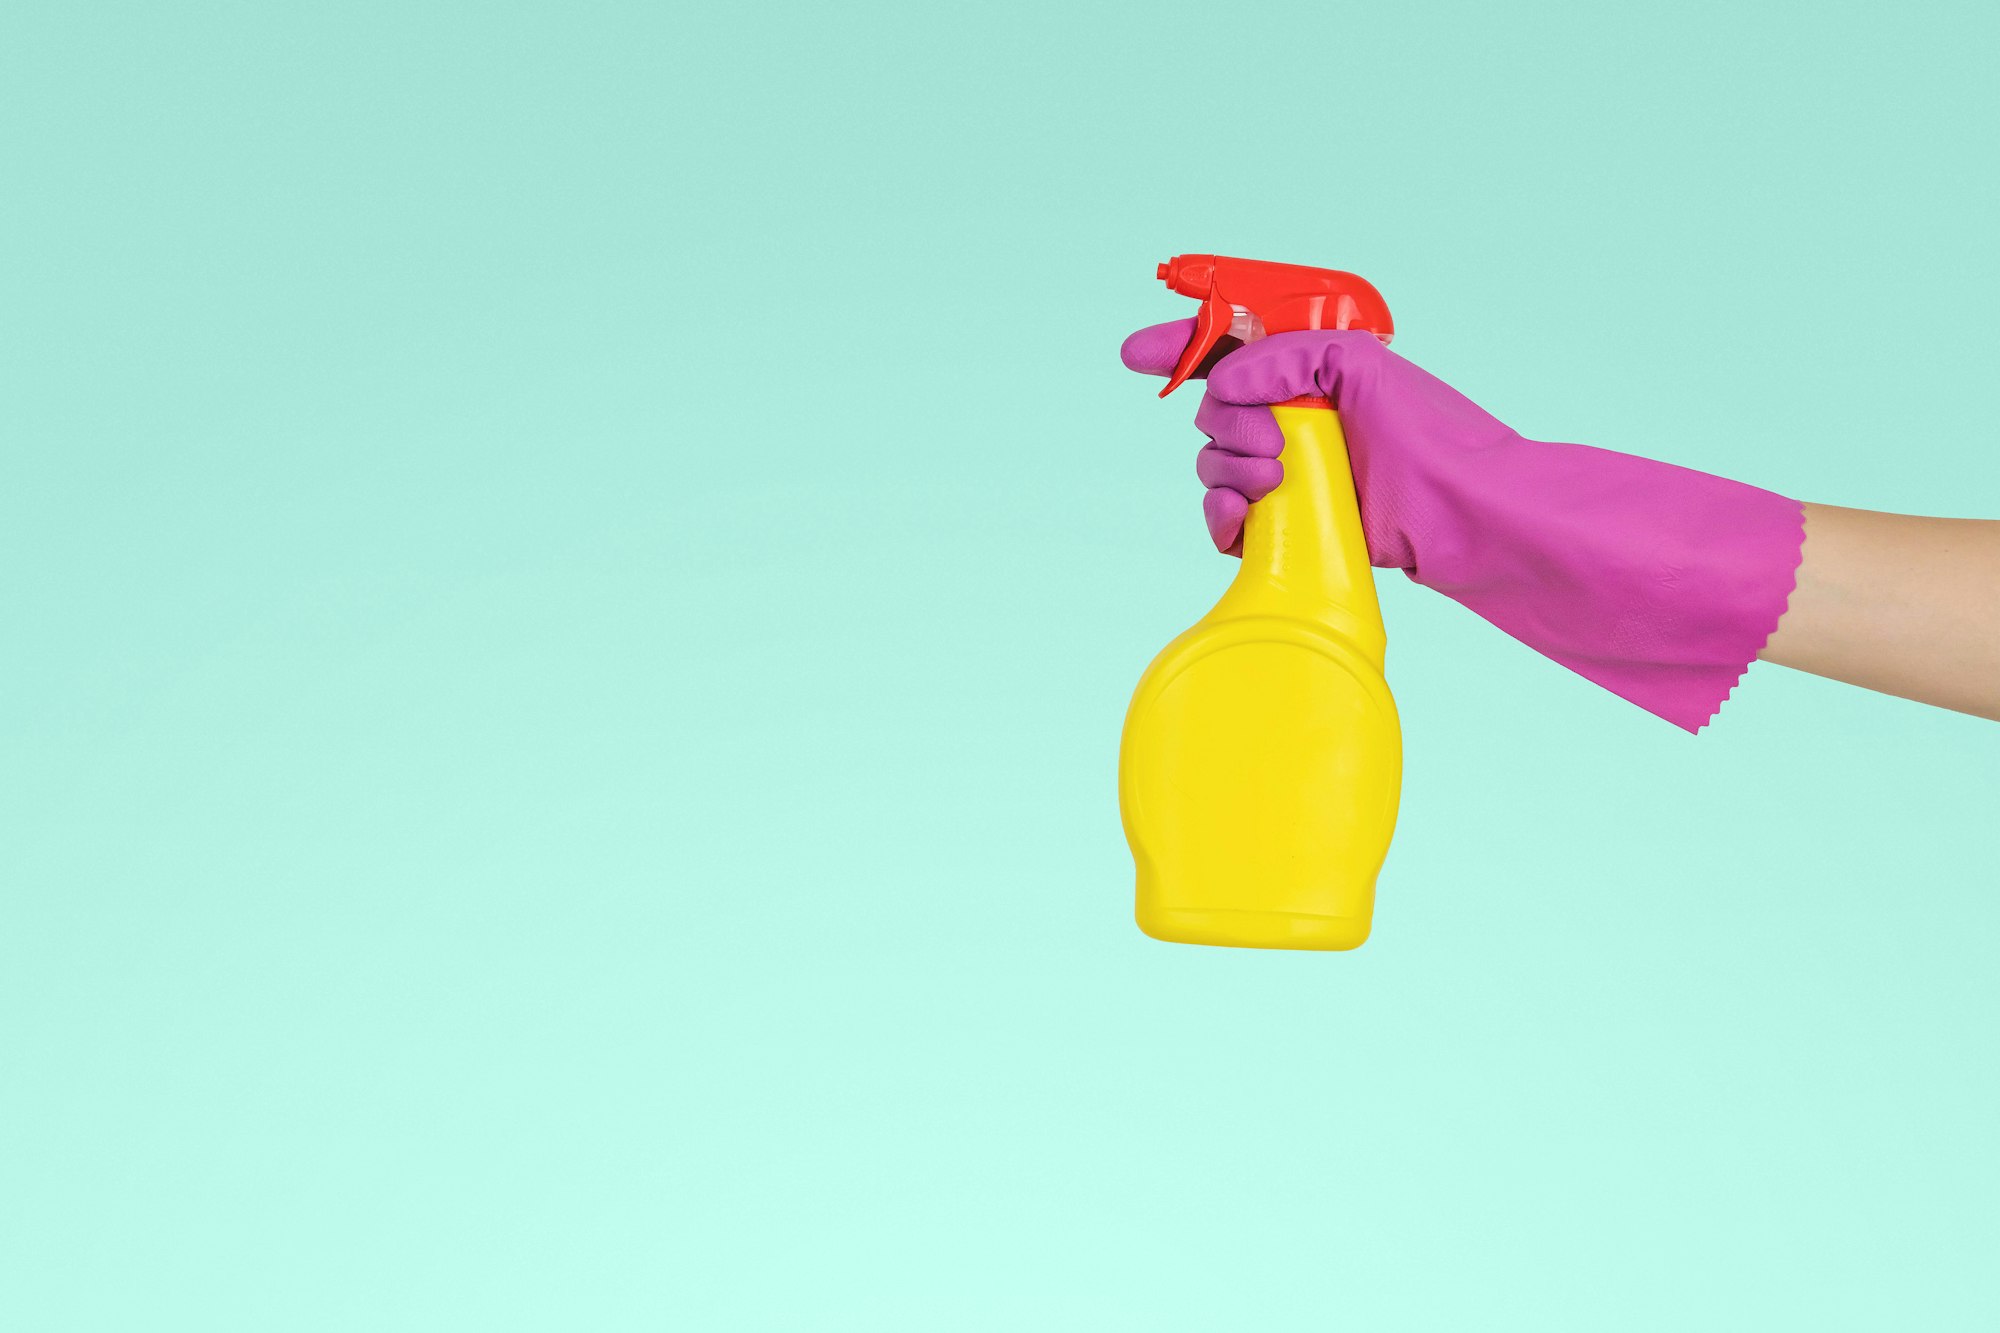 Violet gloves and yellow spray bottle used for cleaning.